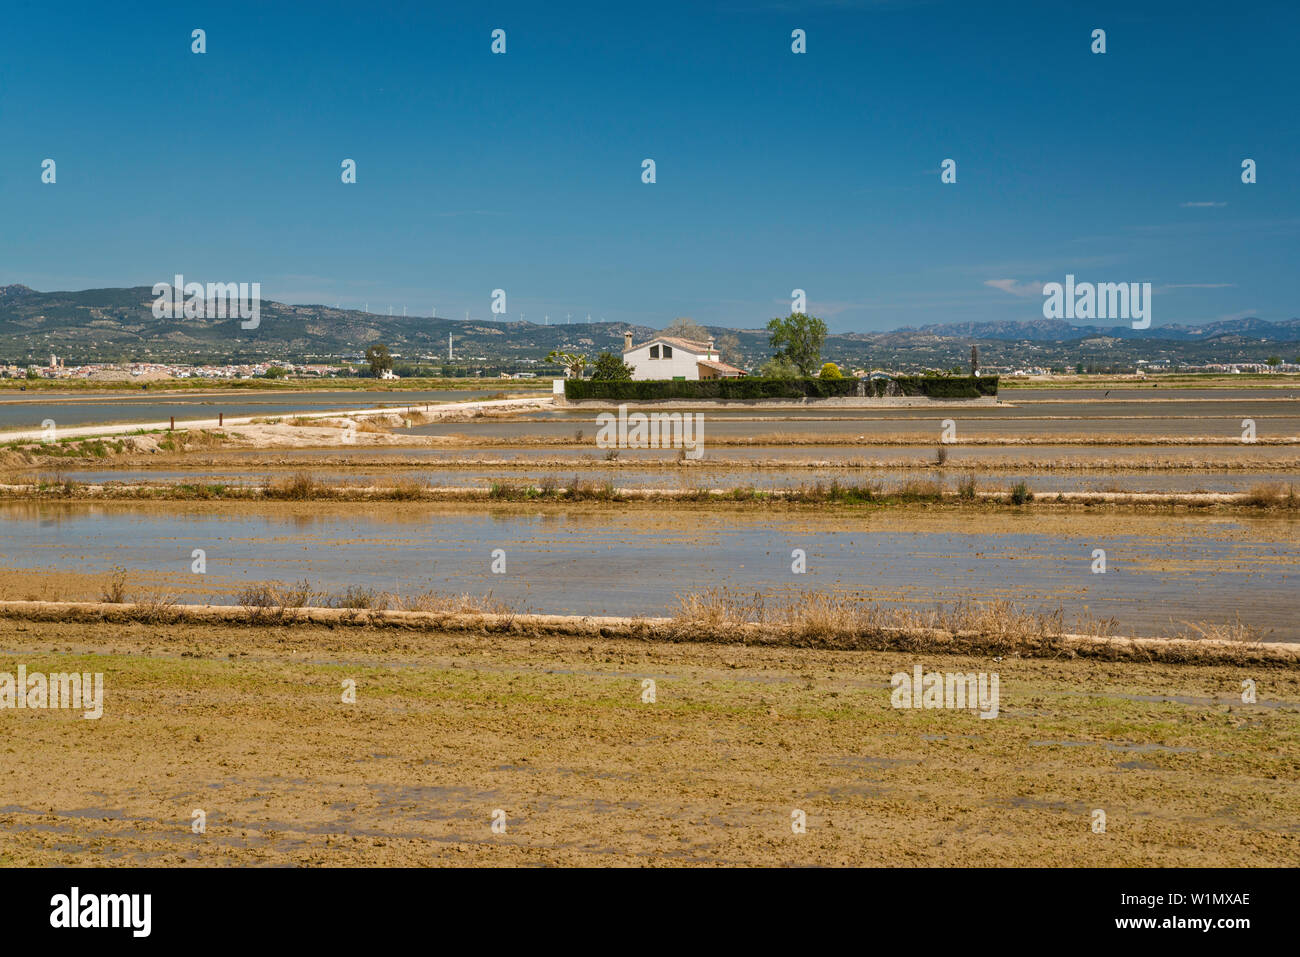 Paddy field for growing rice, residential house in distance, in delta of Rio Ebro, near Deltebre, Catalonia, Spain Stock Photo